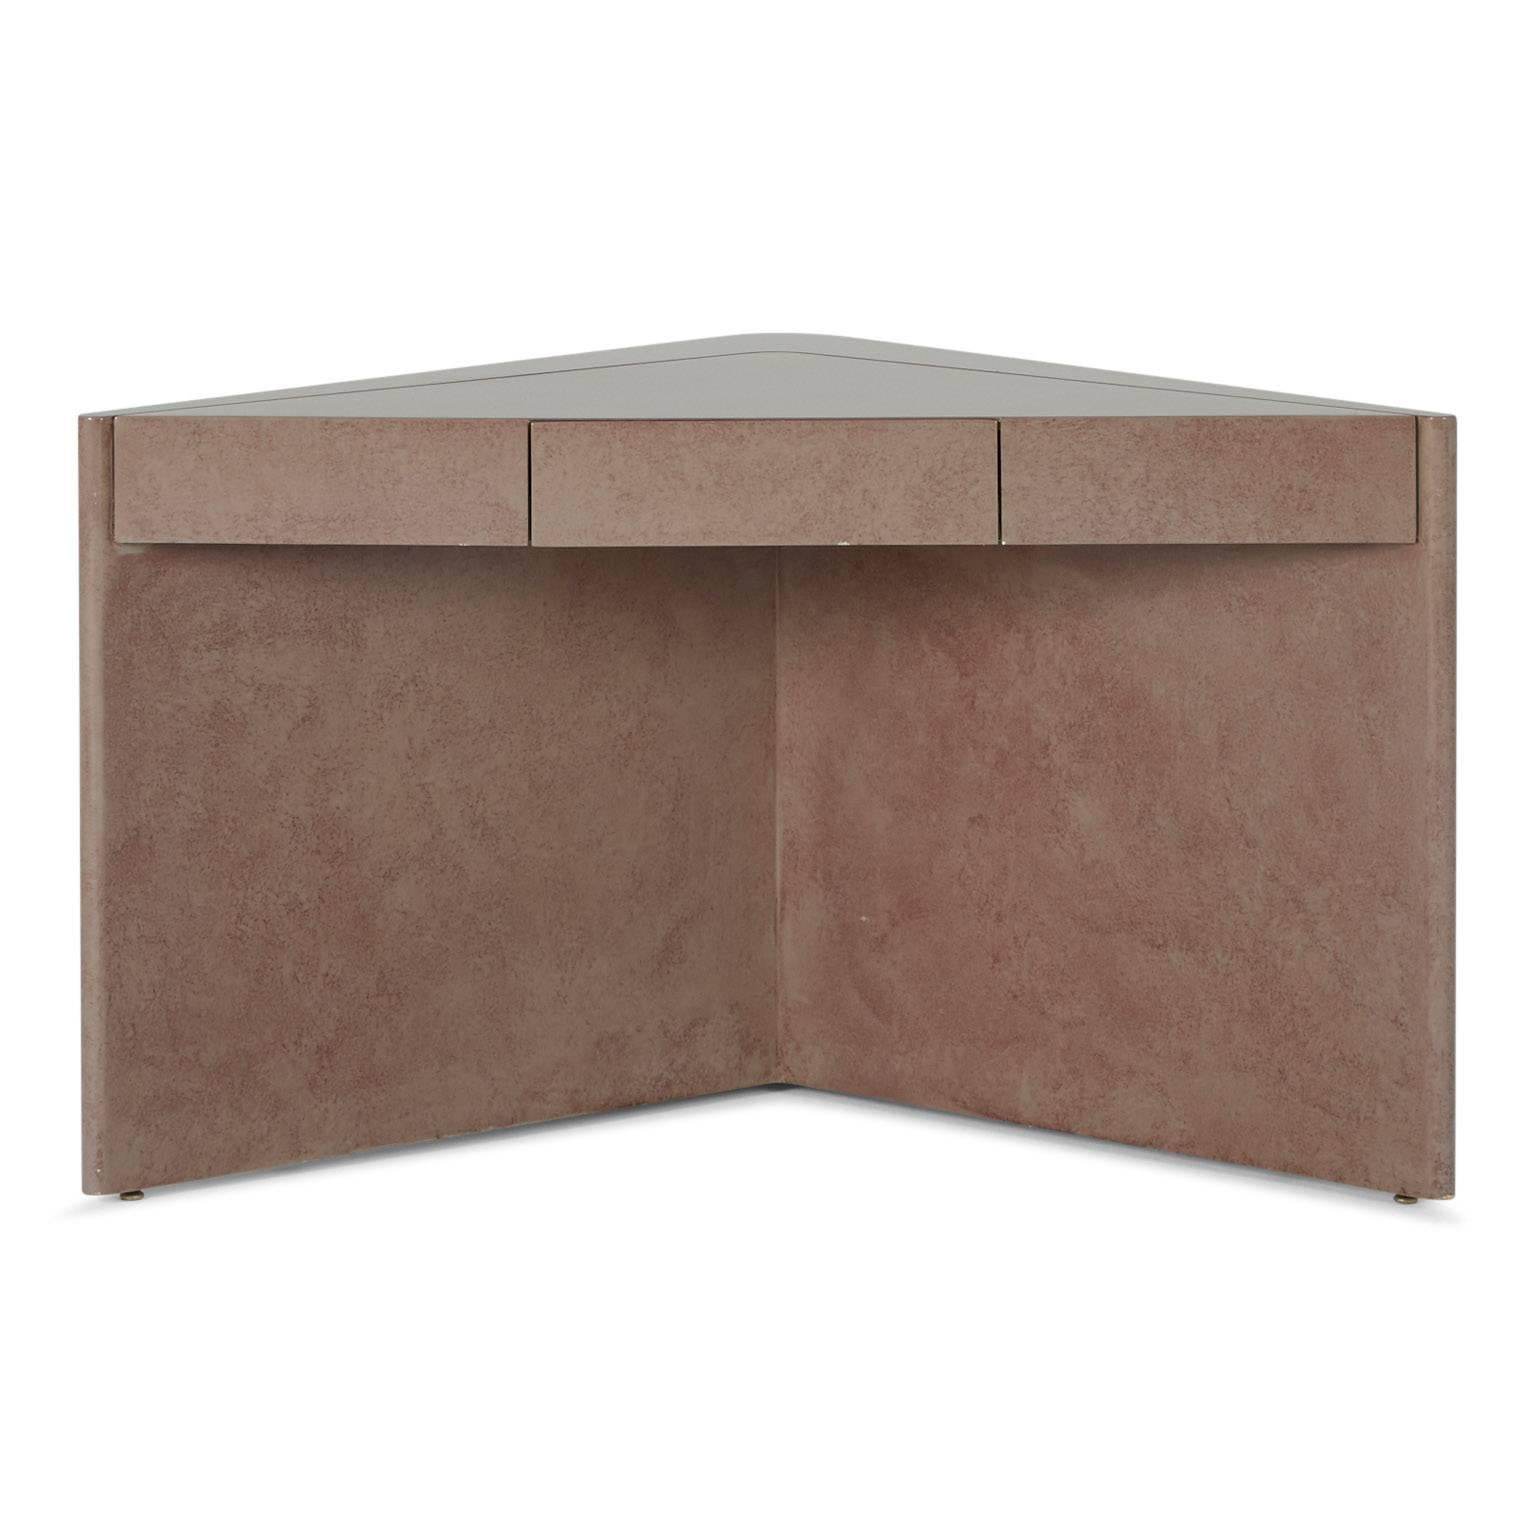 Late 20th Century Pastel Pink Triangular Lacquered Corner Table, circa 1980s